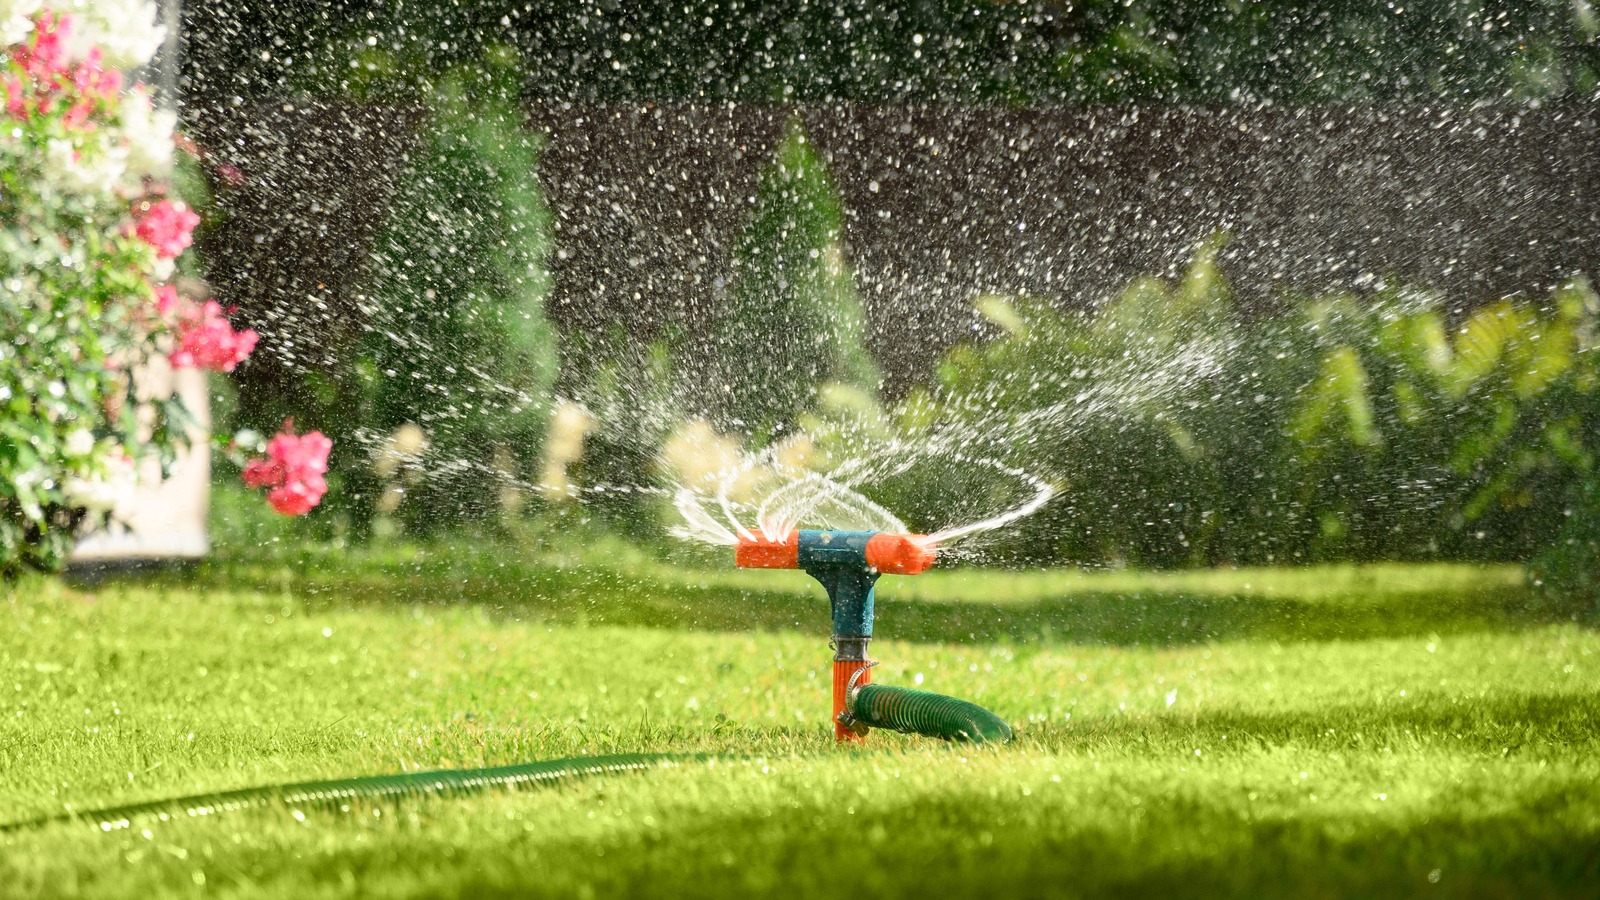 The Type Of Sprinkler That Can Cause More Harm Than Good To Your Plants